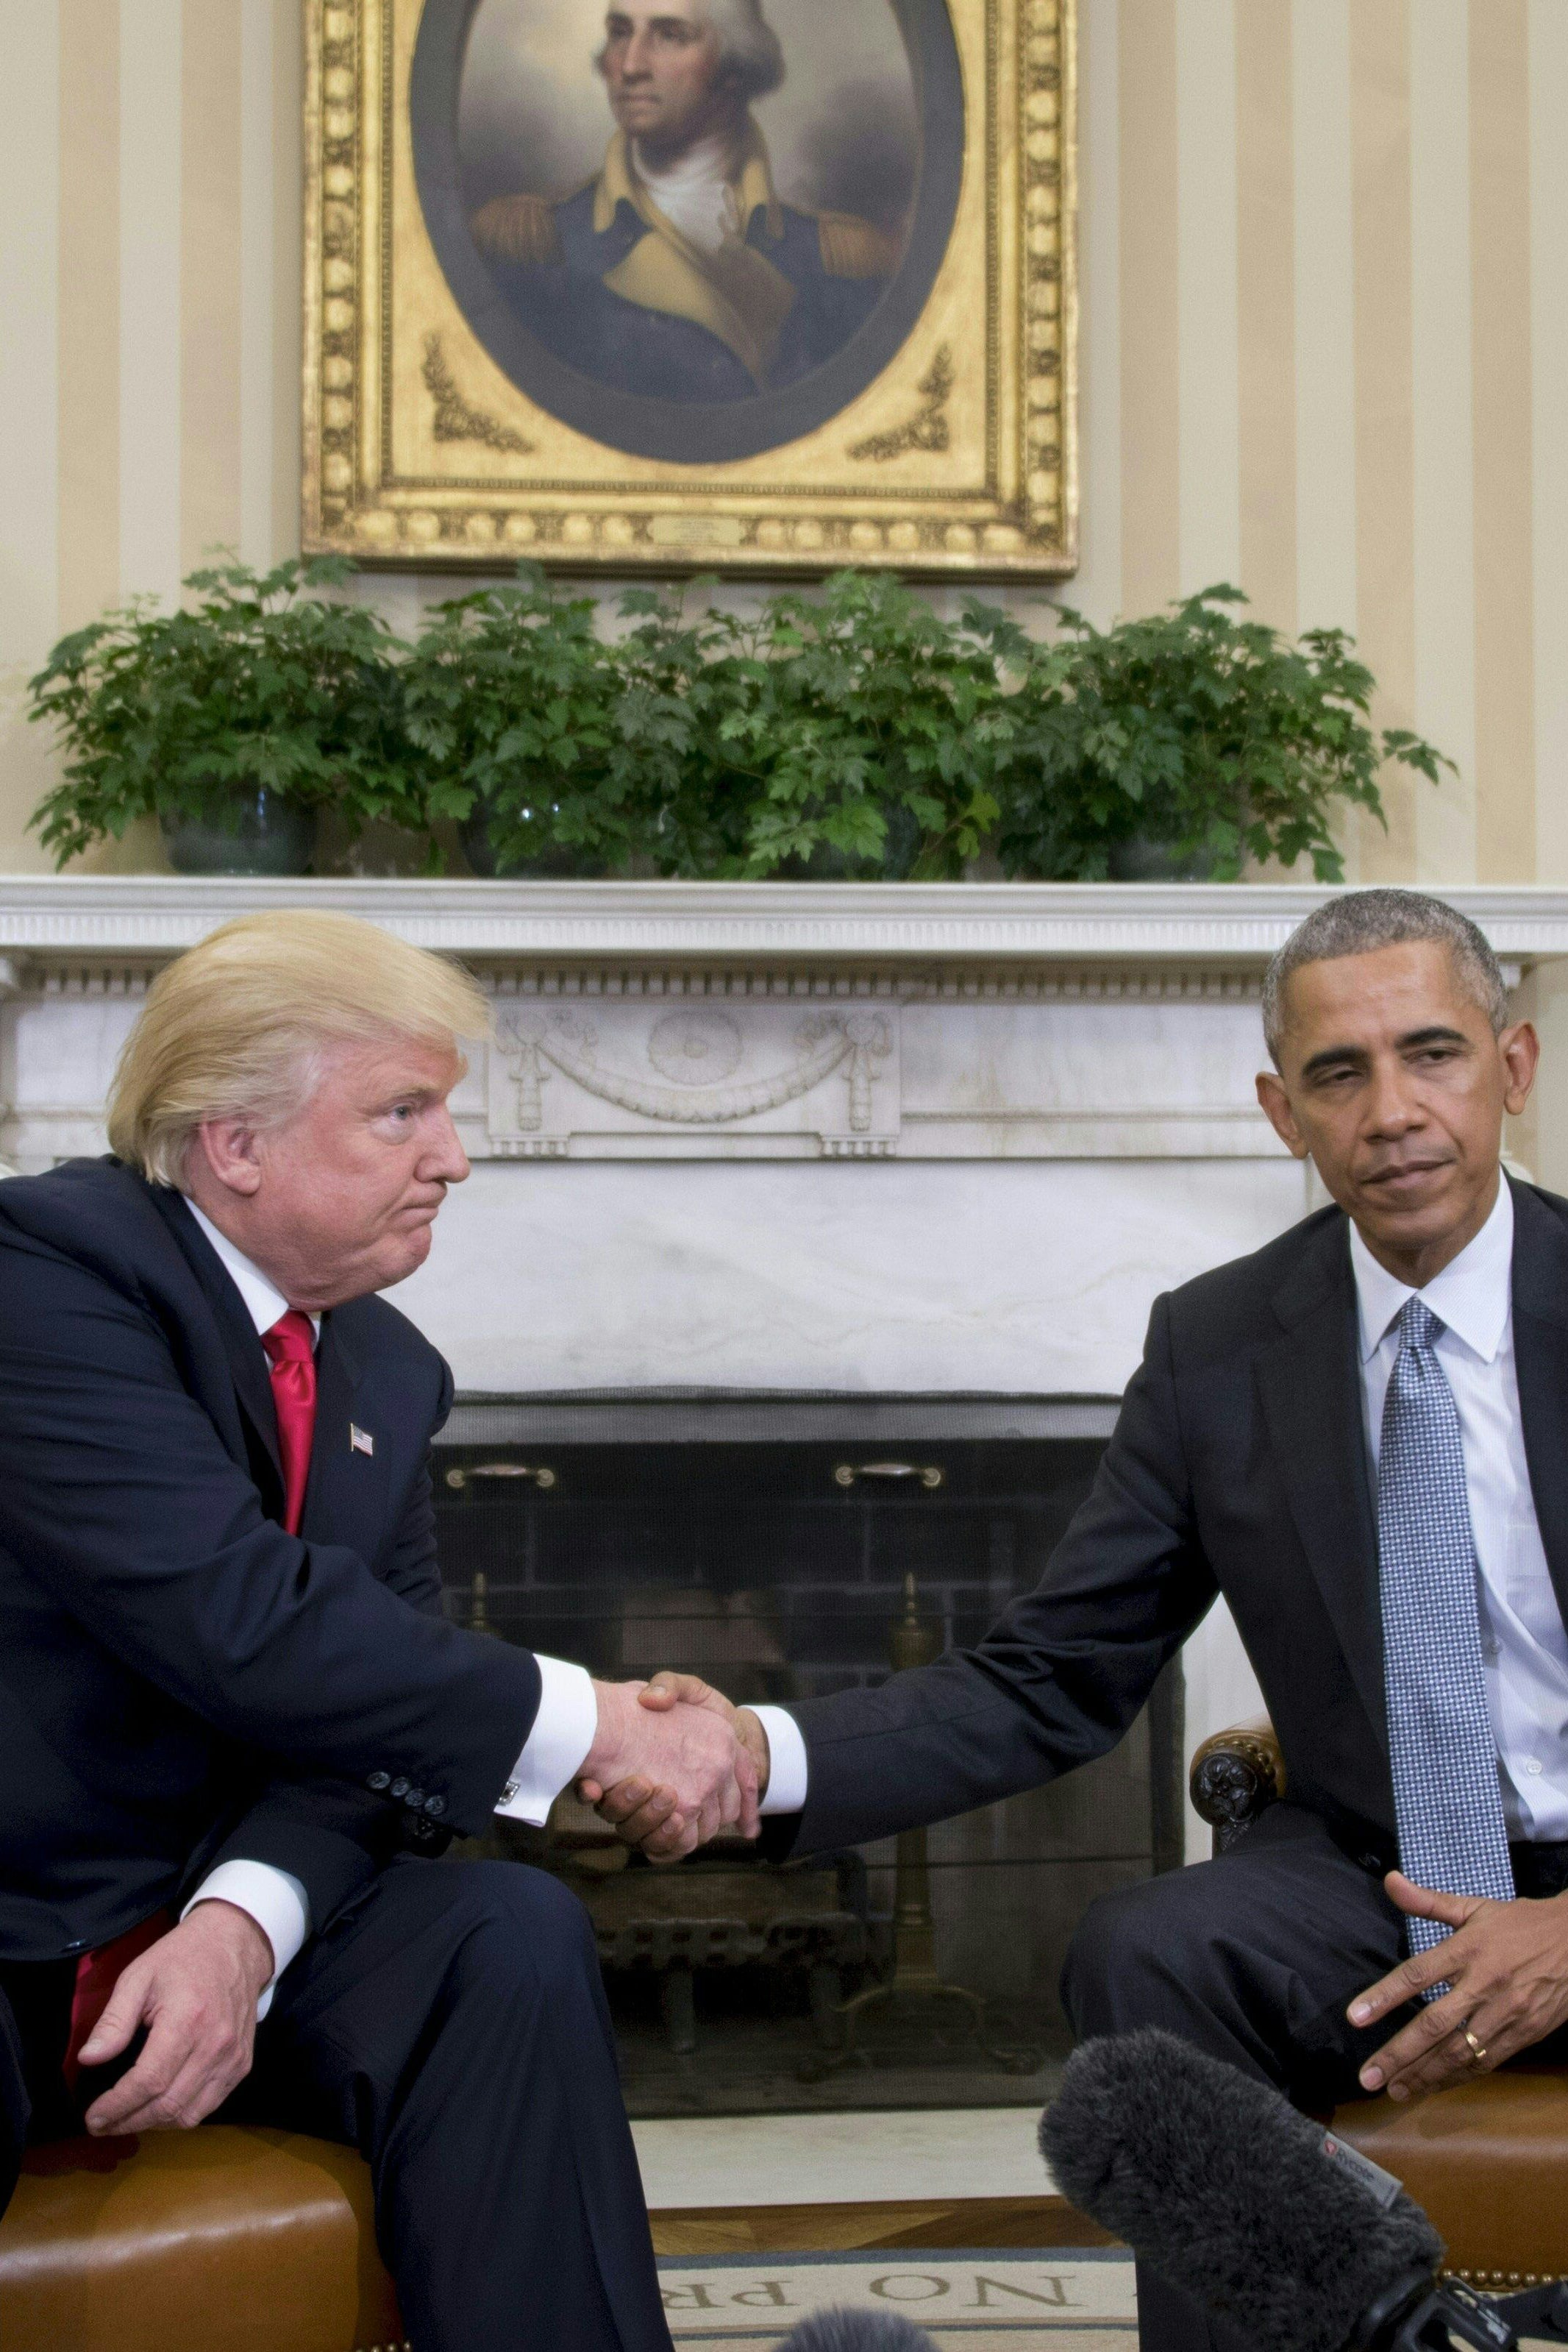 Donald Trump Blocks Press Access For First Meeting With President Obama
